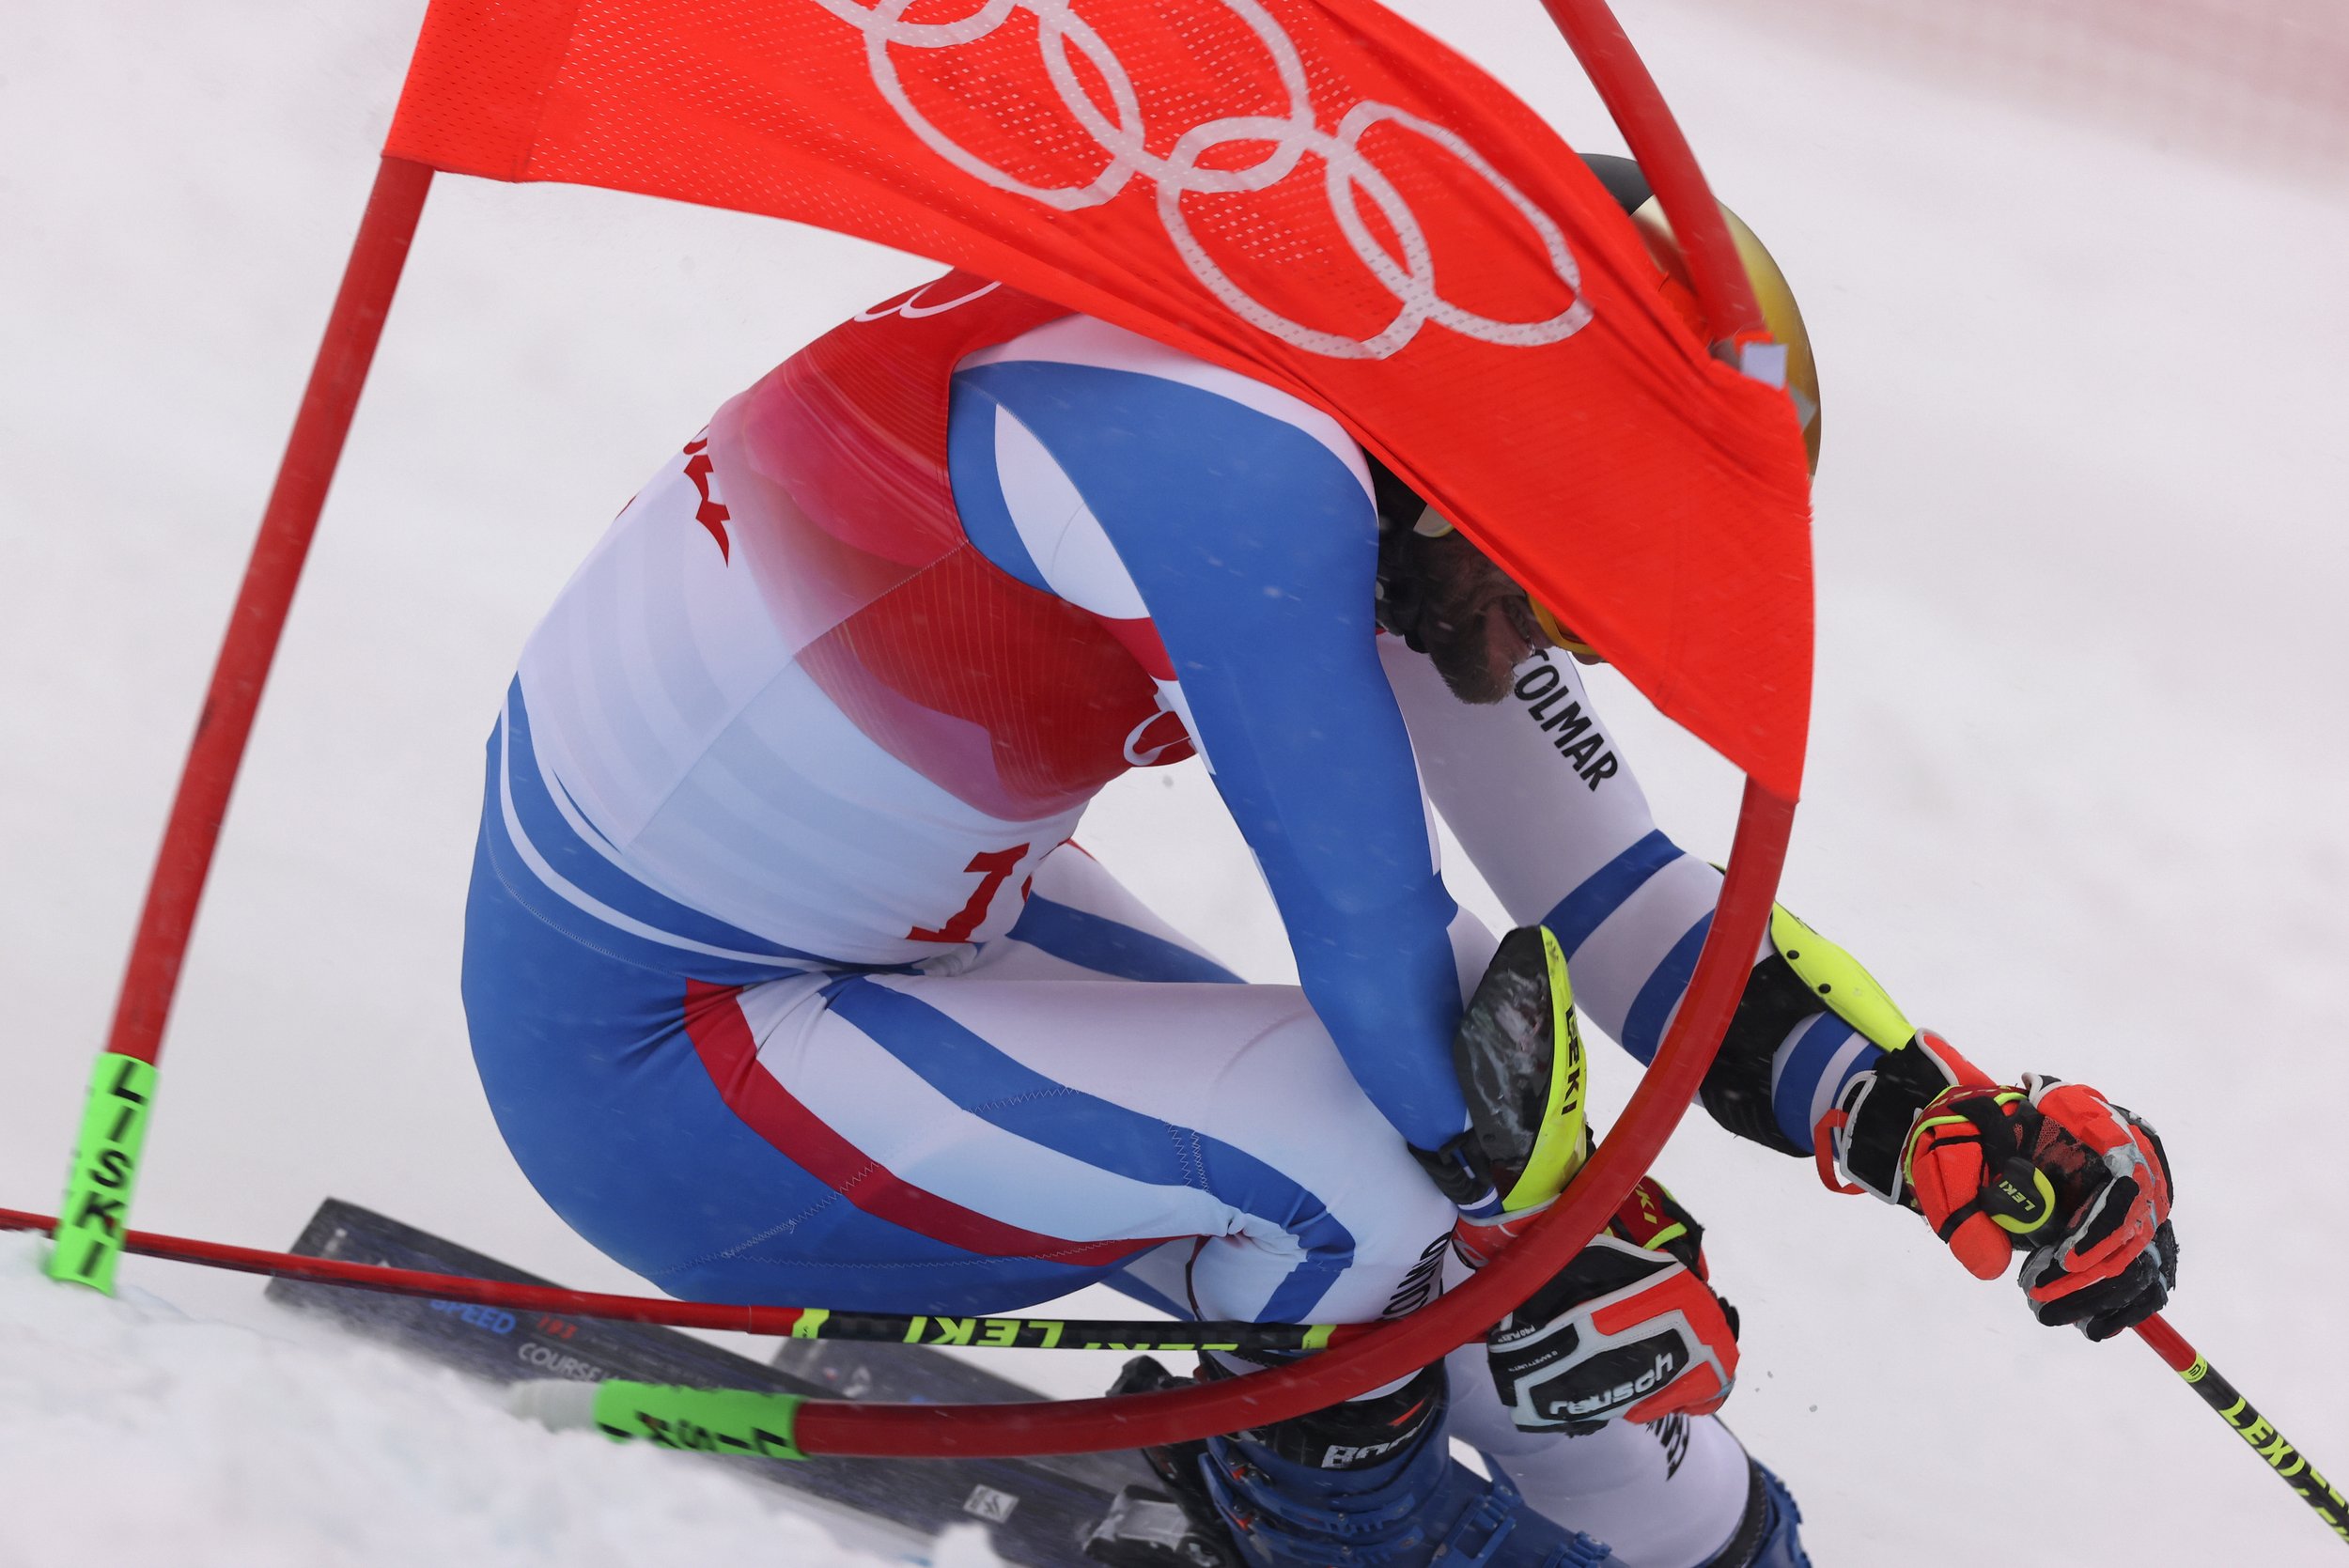  Thibaut Favrot, of France makes a turn during the second run of the men's giant slalom at the 2022 Winter Olympics, Sunday, Feb. 13, 2022, in the Yanqing district of Beijing. (AP Photo/Alessandro Trovati) 